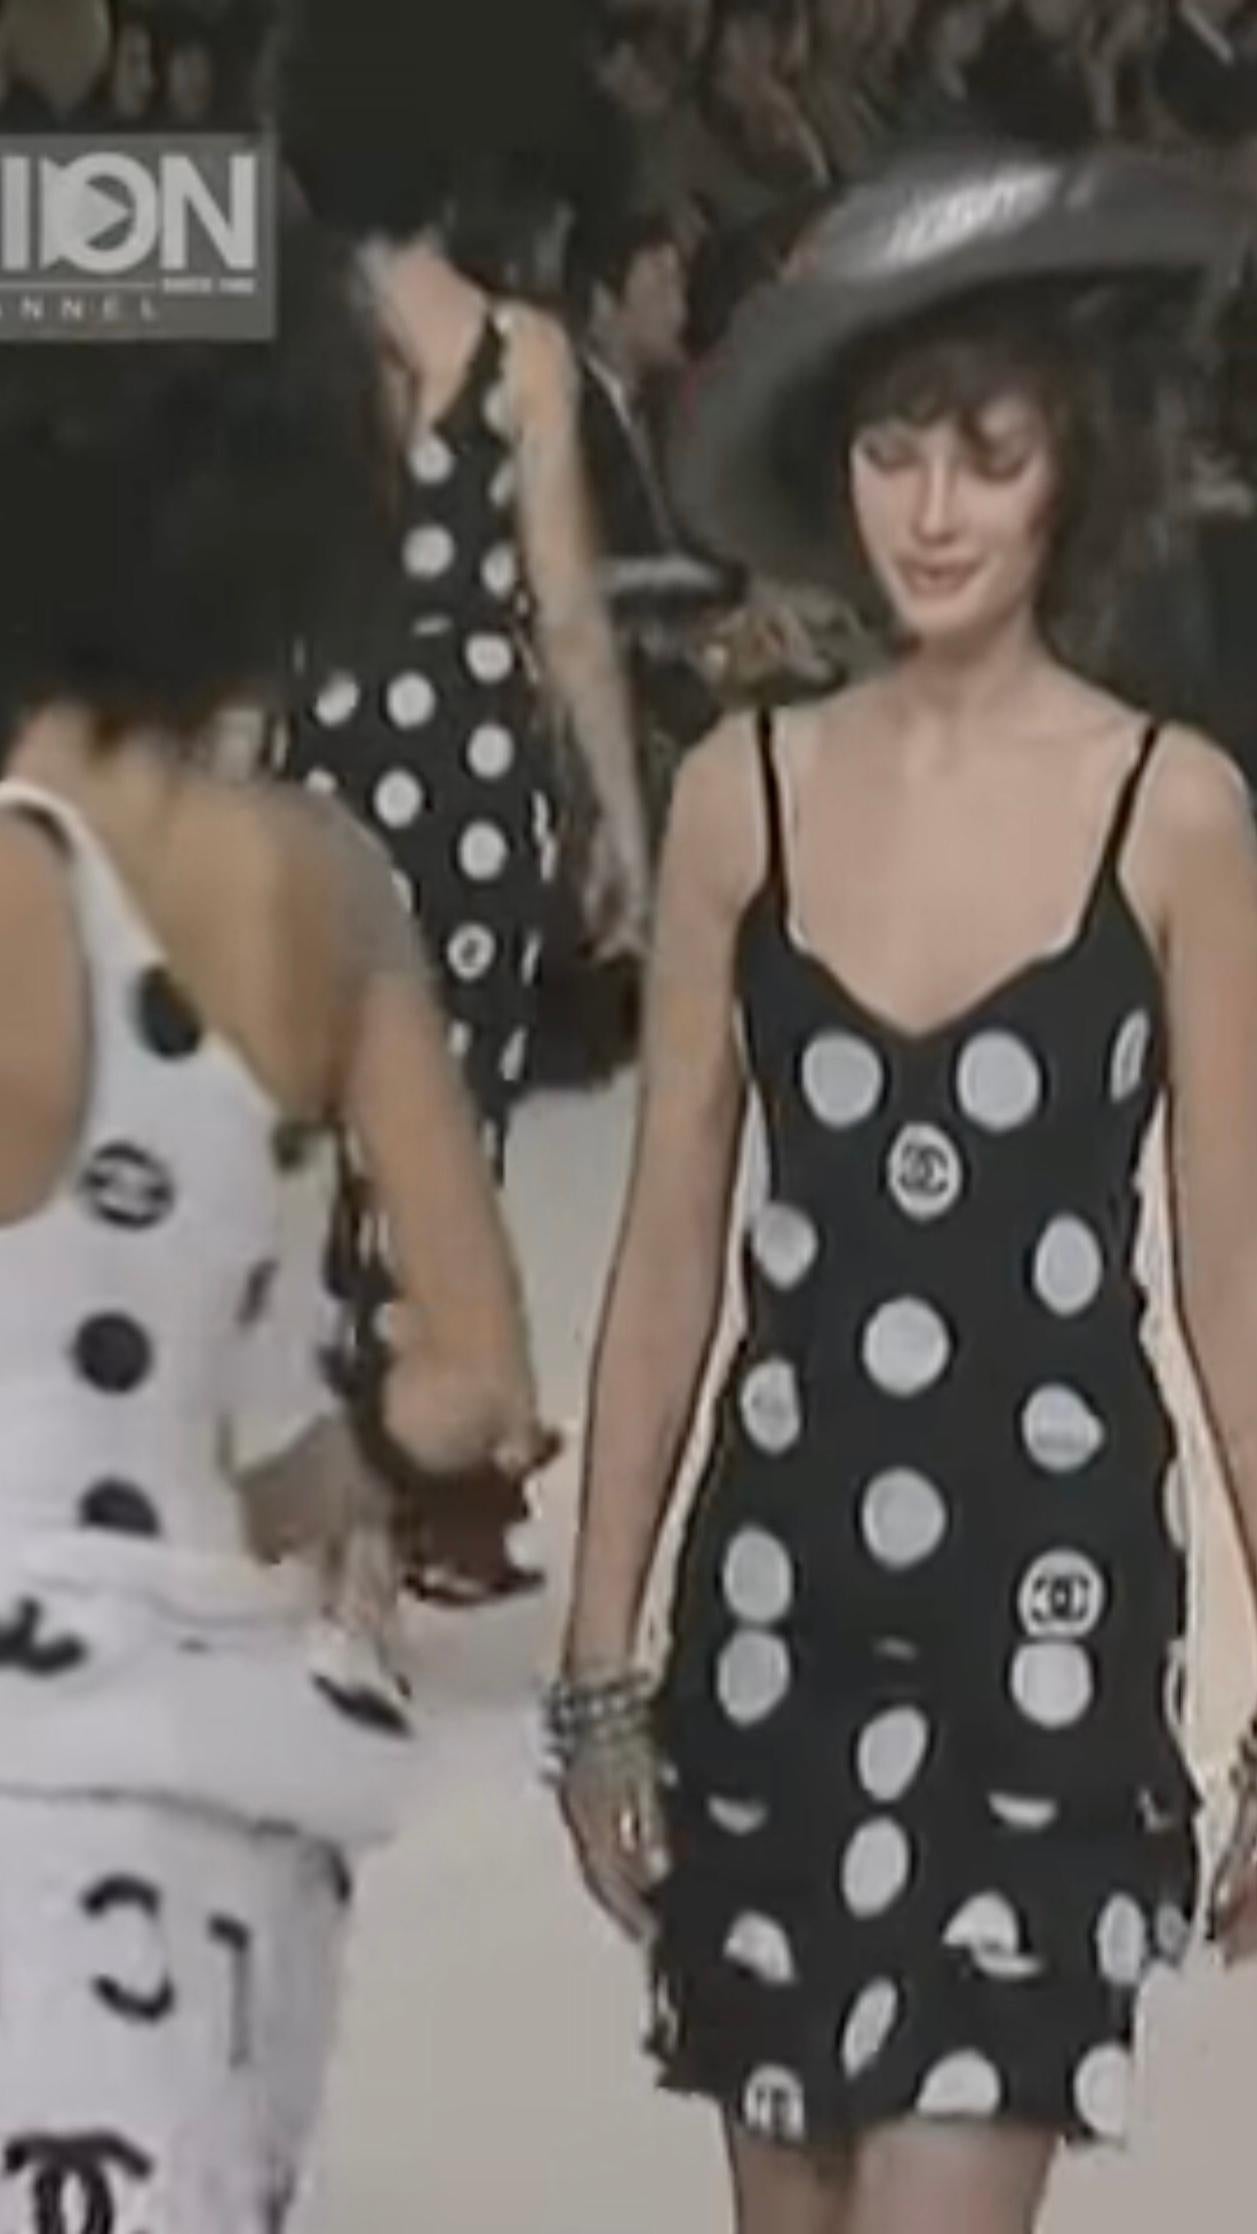 CHANEL Vintage SS 1997 Runway Black and White Tiered Silk Polka Dot Tank Dress For Sale 1